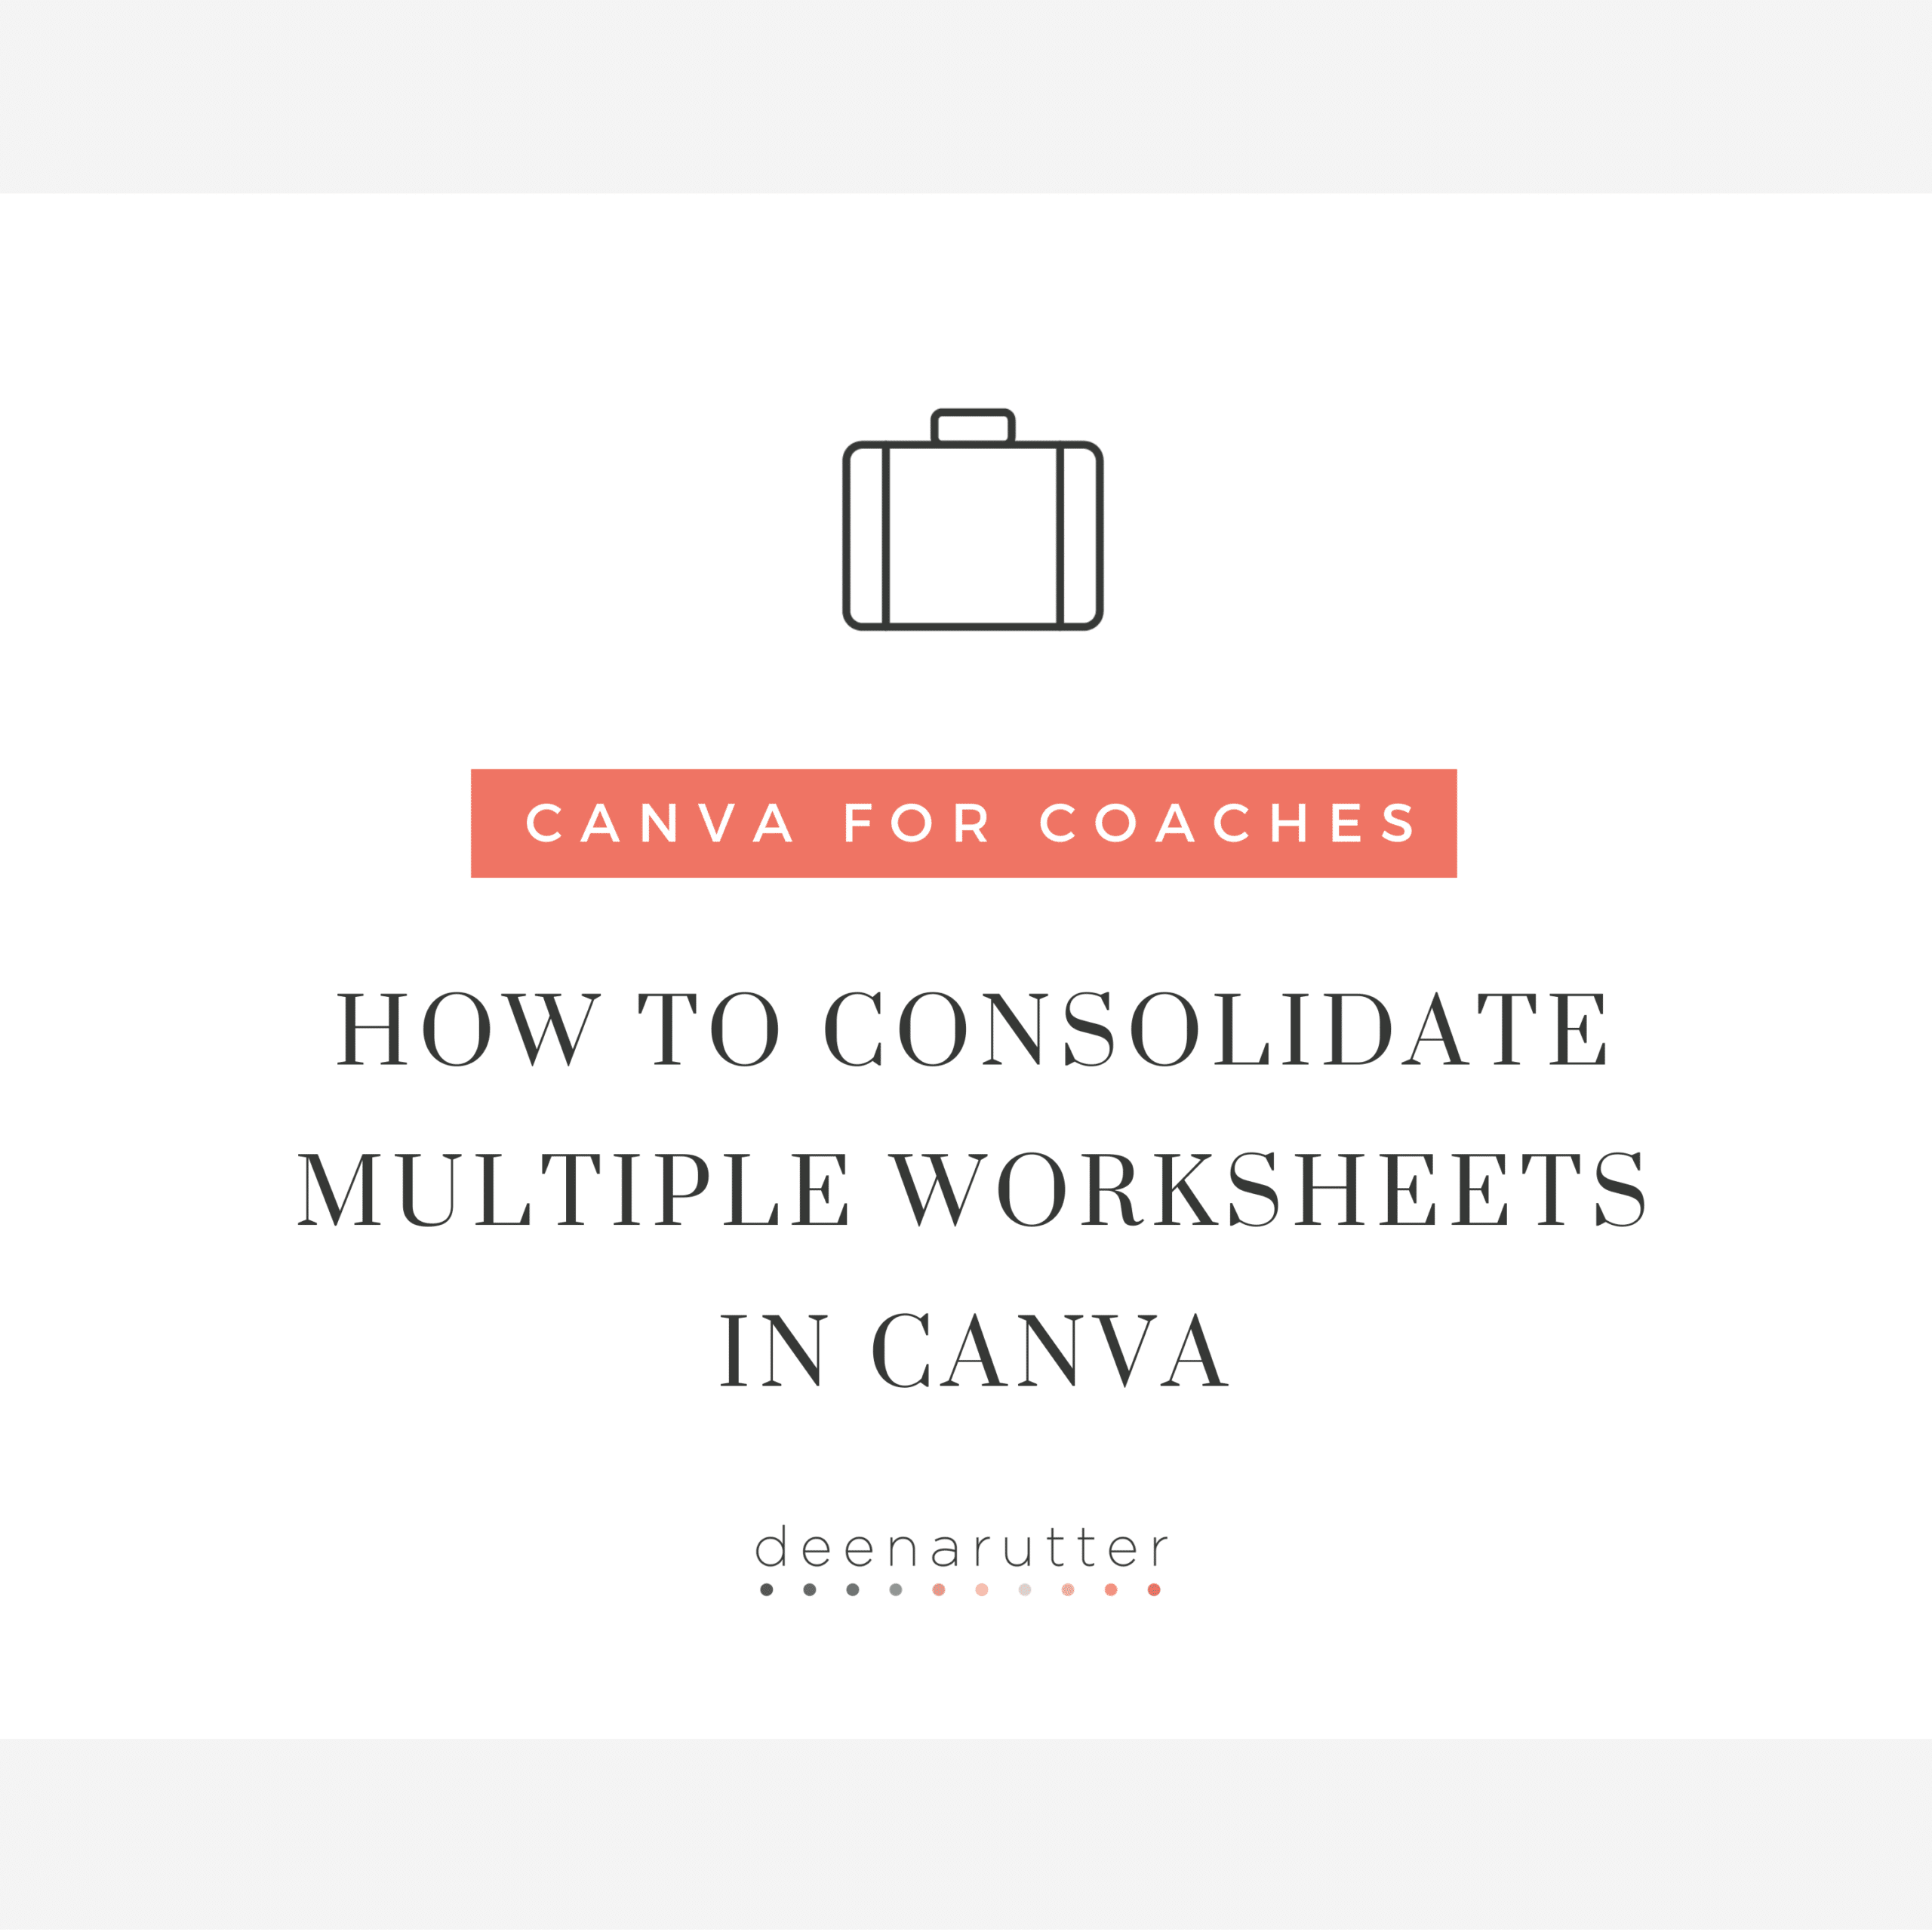 how-to-consolidate-multiple-worksheets-in-canva-deena-rutter